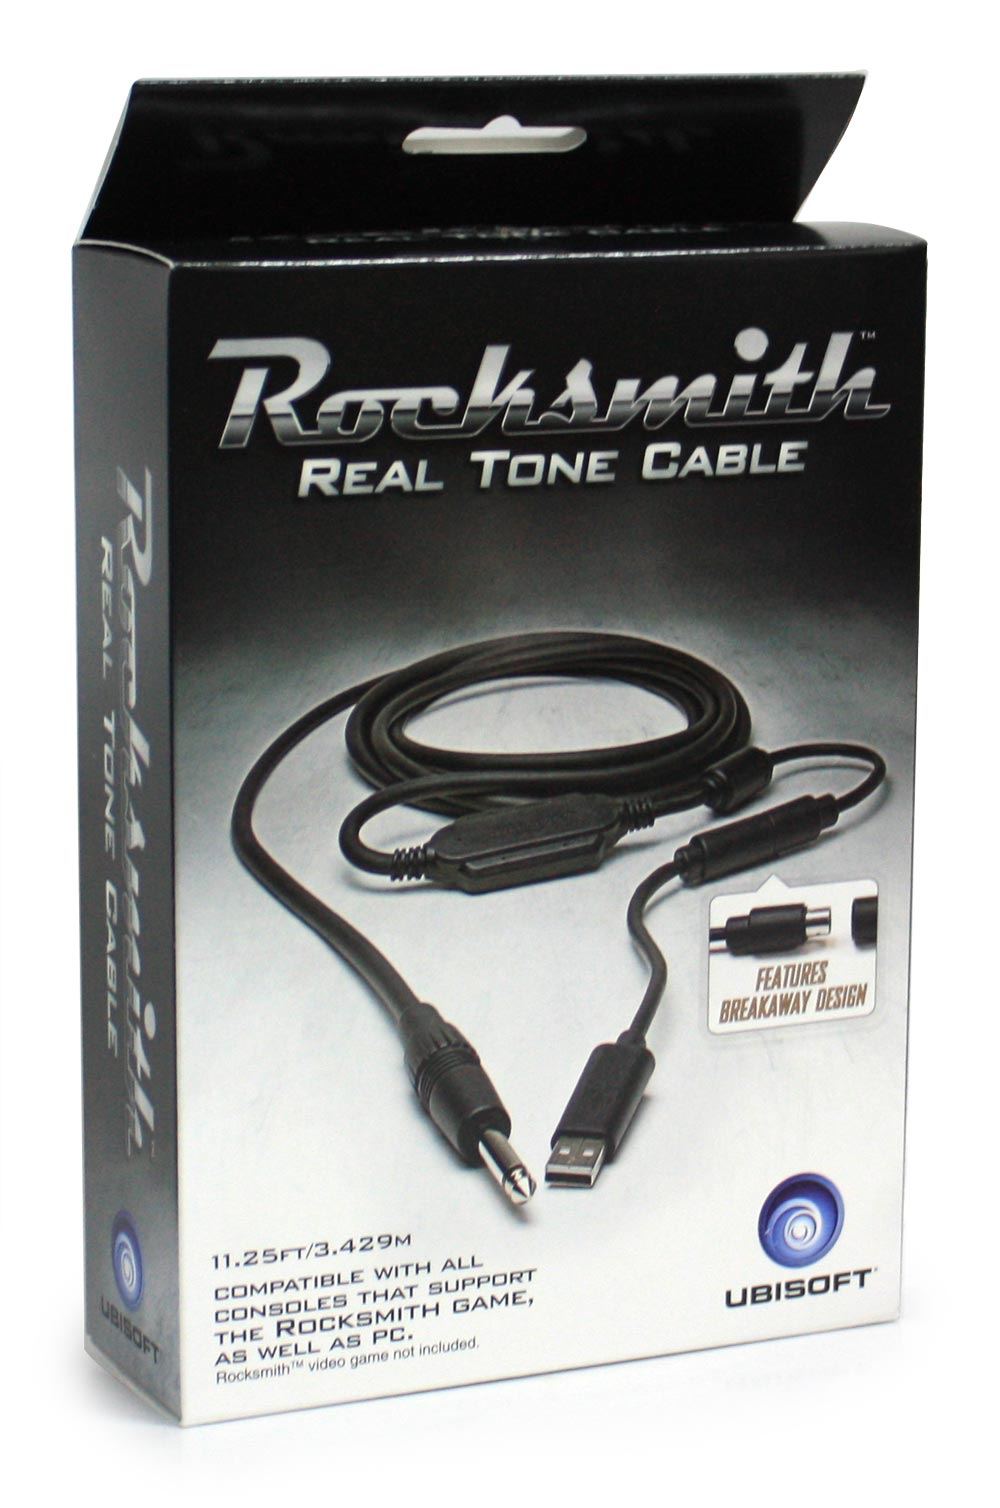 Rocksmith Real Tone Cable for Windows, PlayStation 3, Xbox360